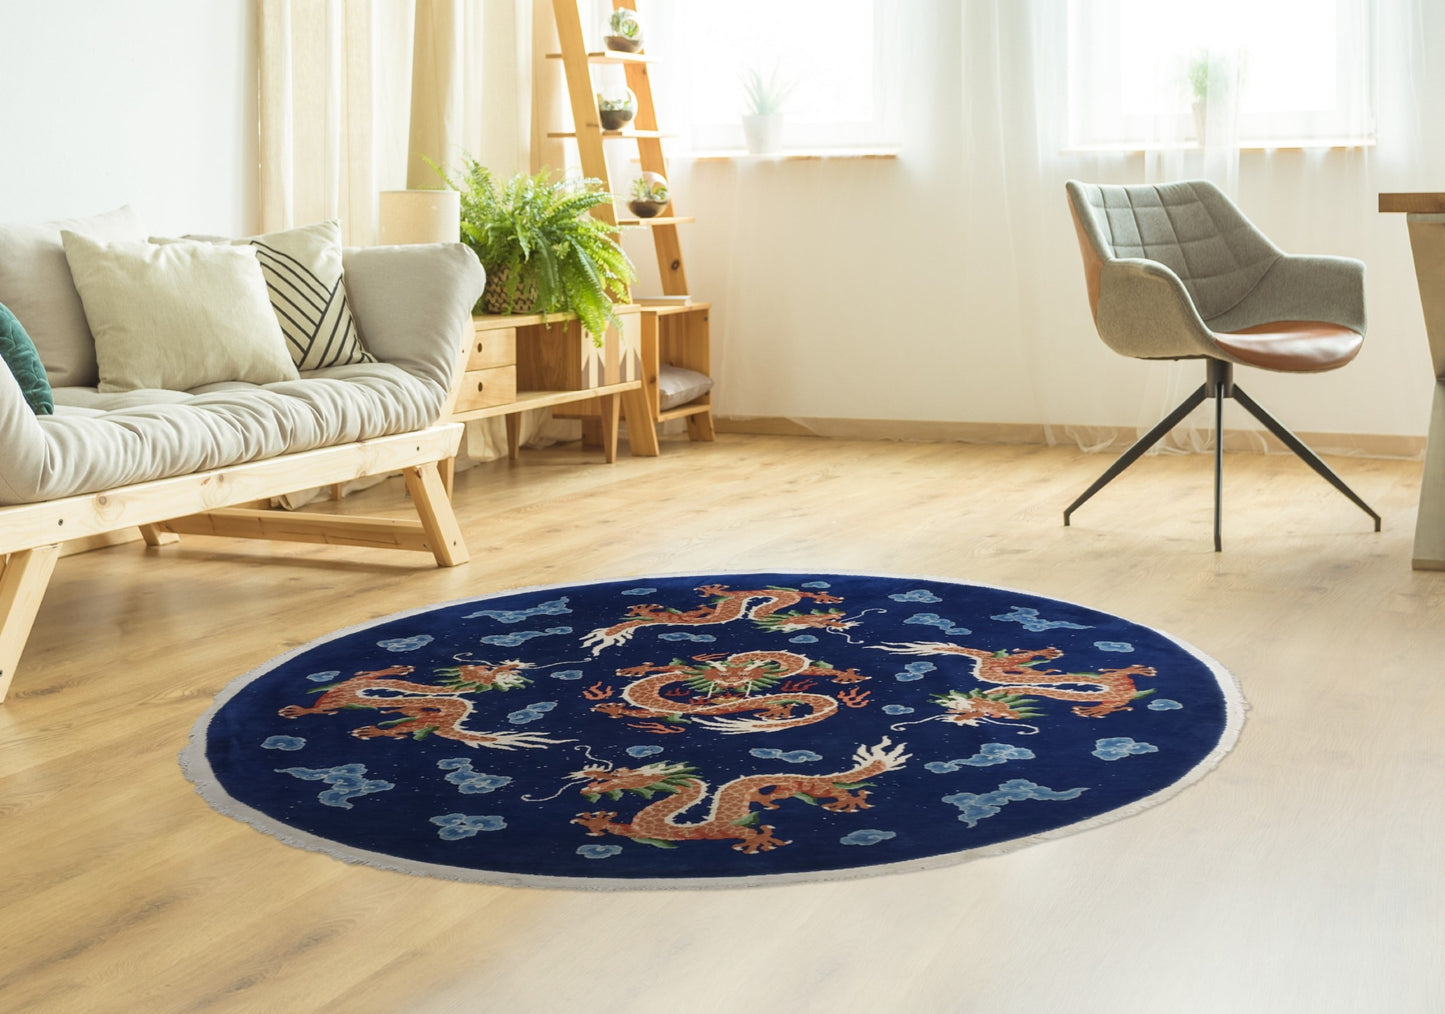 SOLD - Chinese Dragon Rug, Round, 6' diameter, "Antique Dragon Sky"